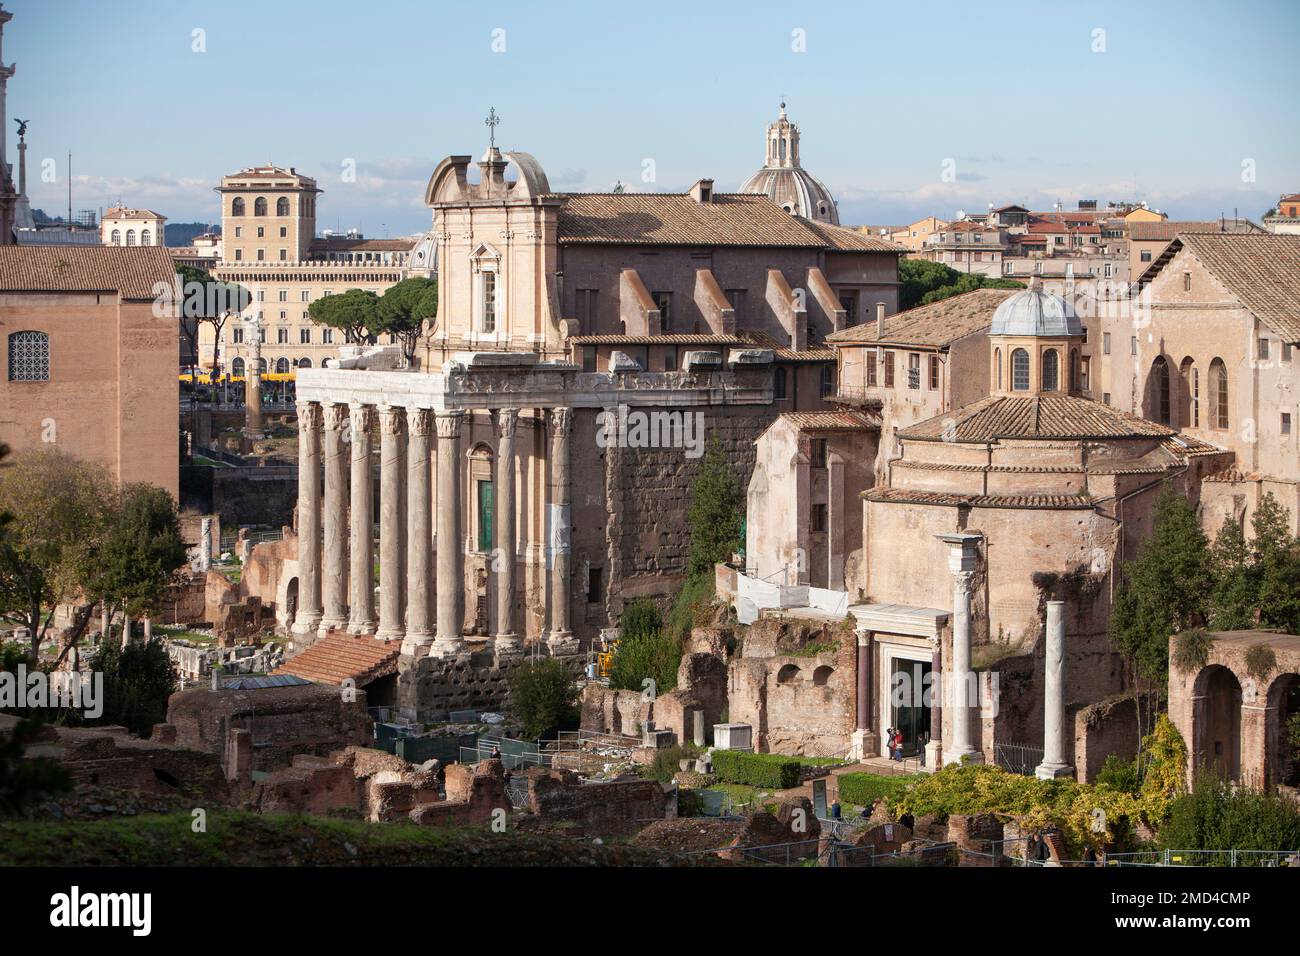 Ancient roman forum in the city of Rome Stock Photo